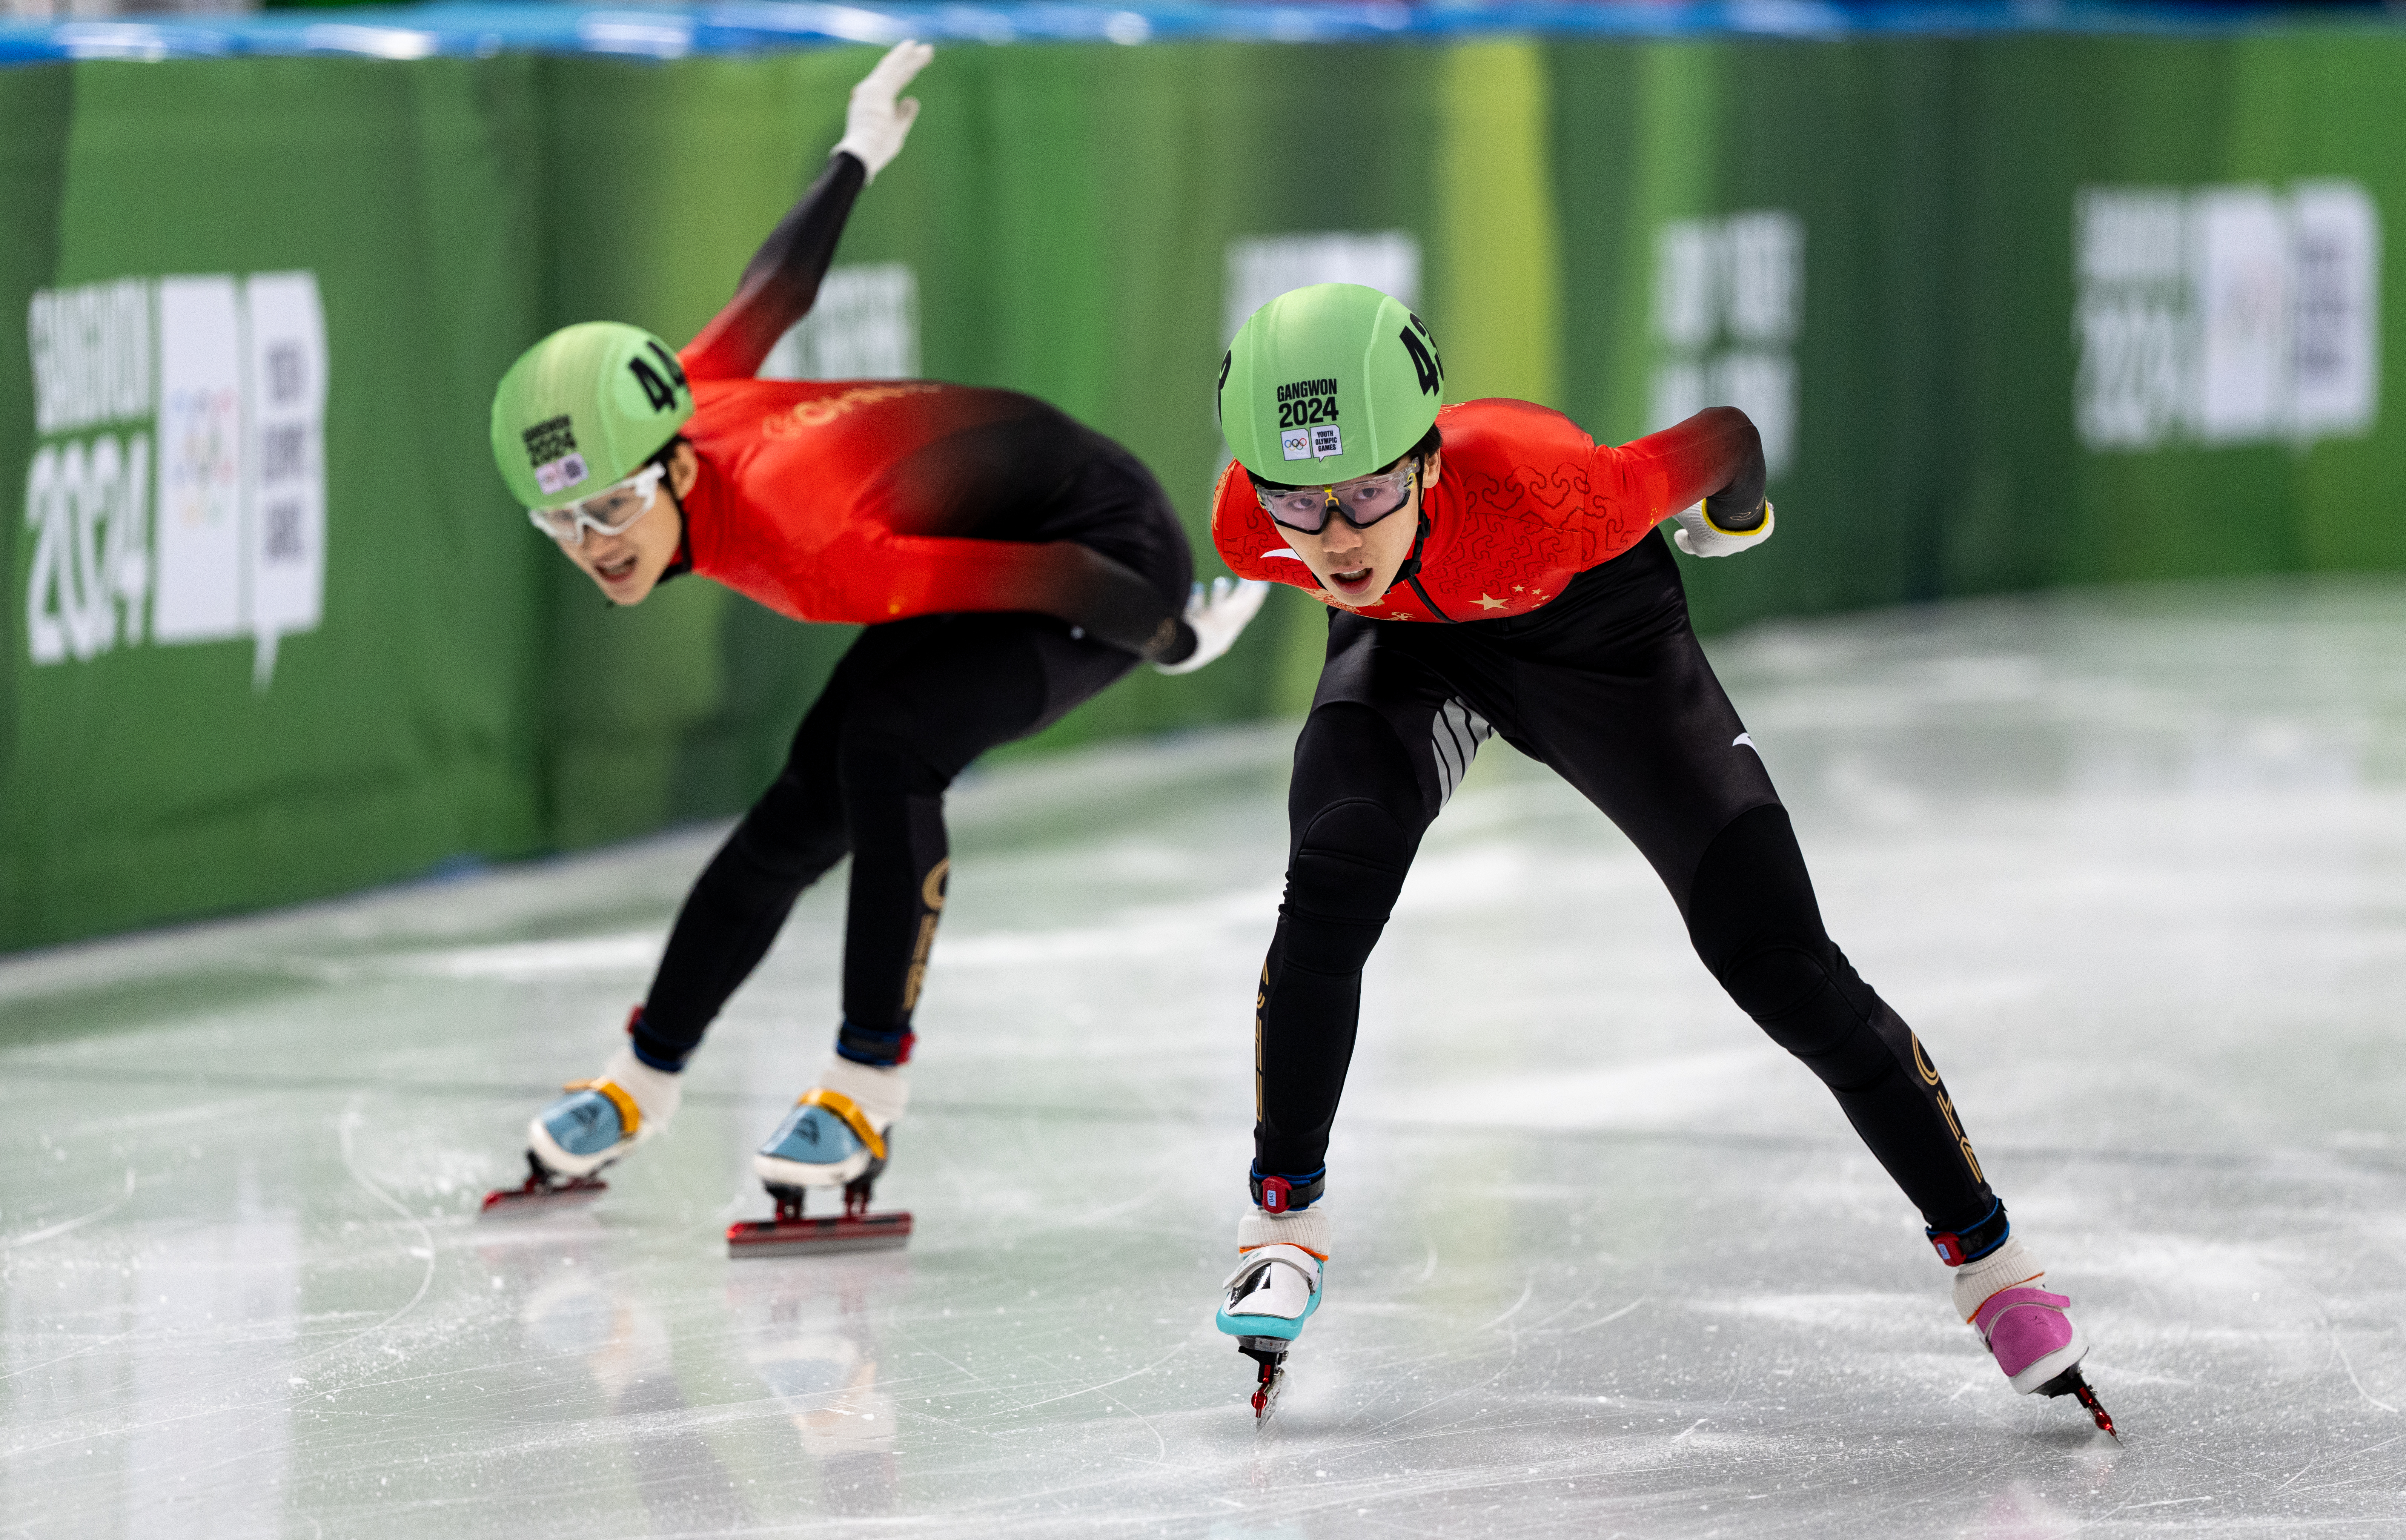 Zhang Bohao (CHN) and Zhang Xinzhe (CHN), behind, in action during the relay changeover